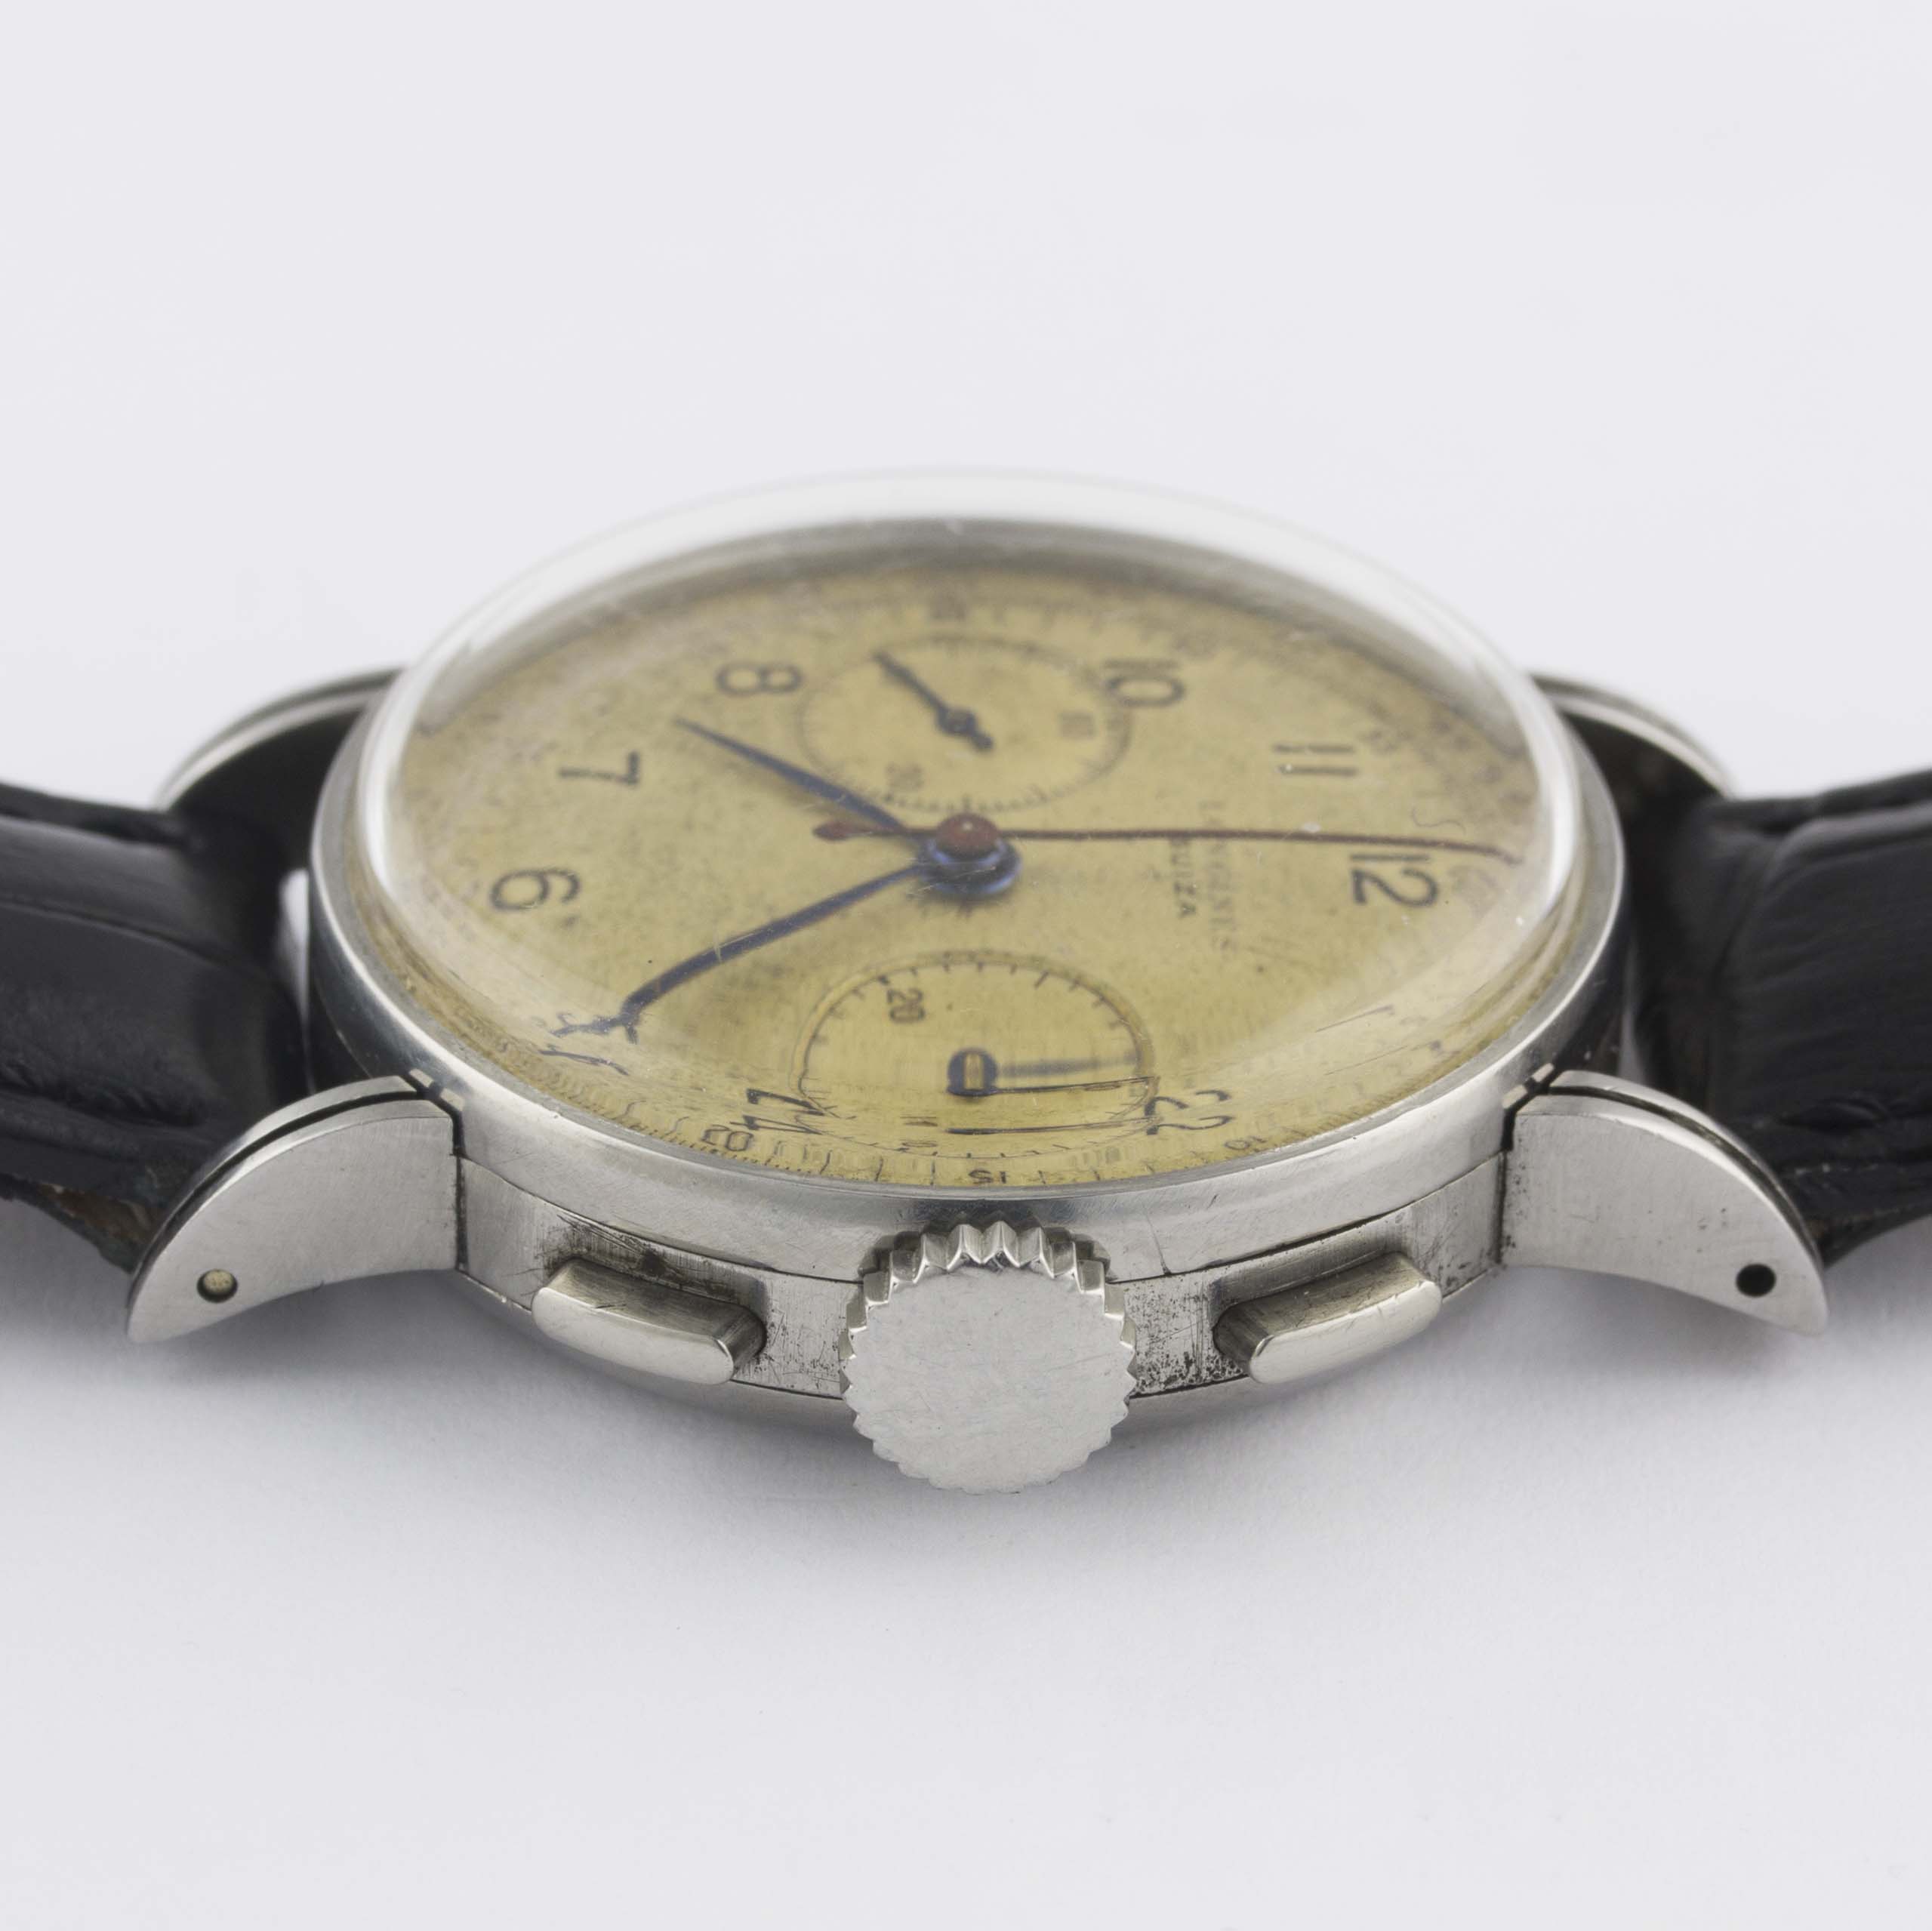 A GENTLEMAN'S STAINLESS STEEL LONGINES FLYBACK CHRONOGRAPH WRIST WATCH CIRCA 1946, REF. 3226 - Image 9 of 10